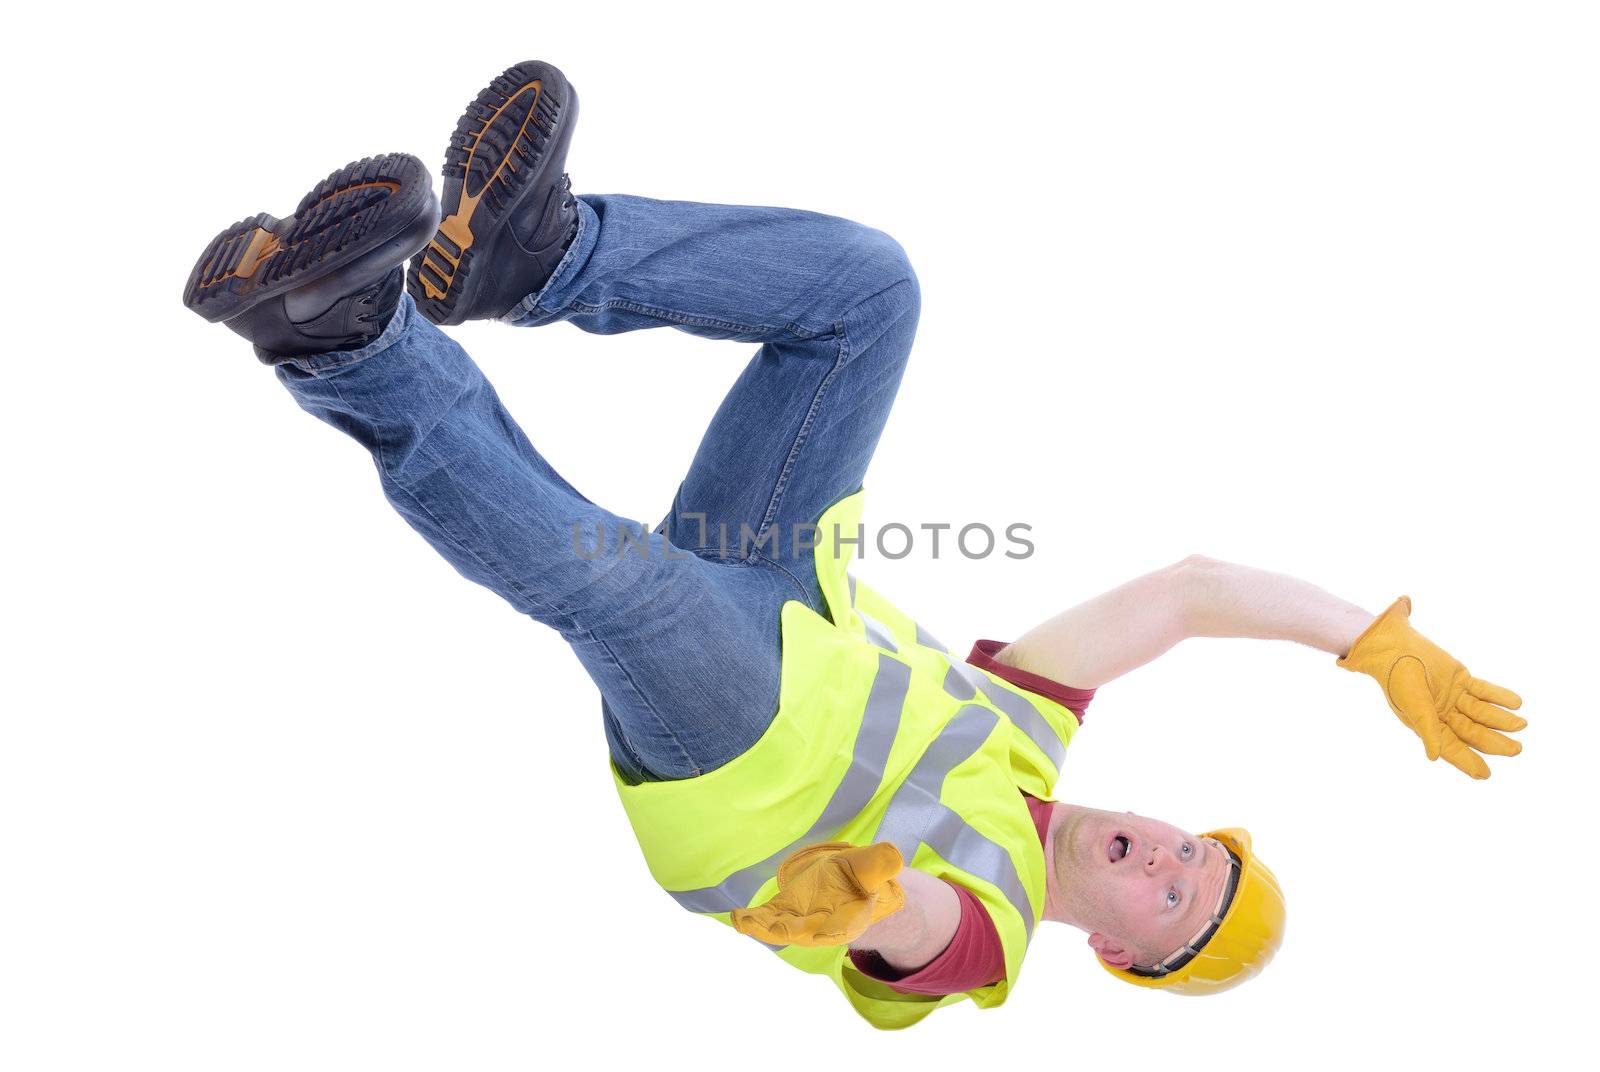 Construction worker falling isolated on white background